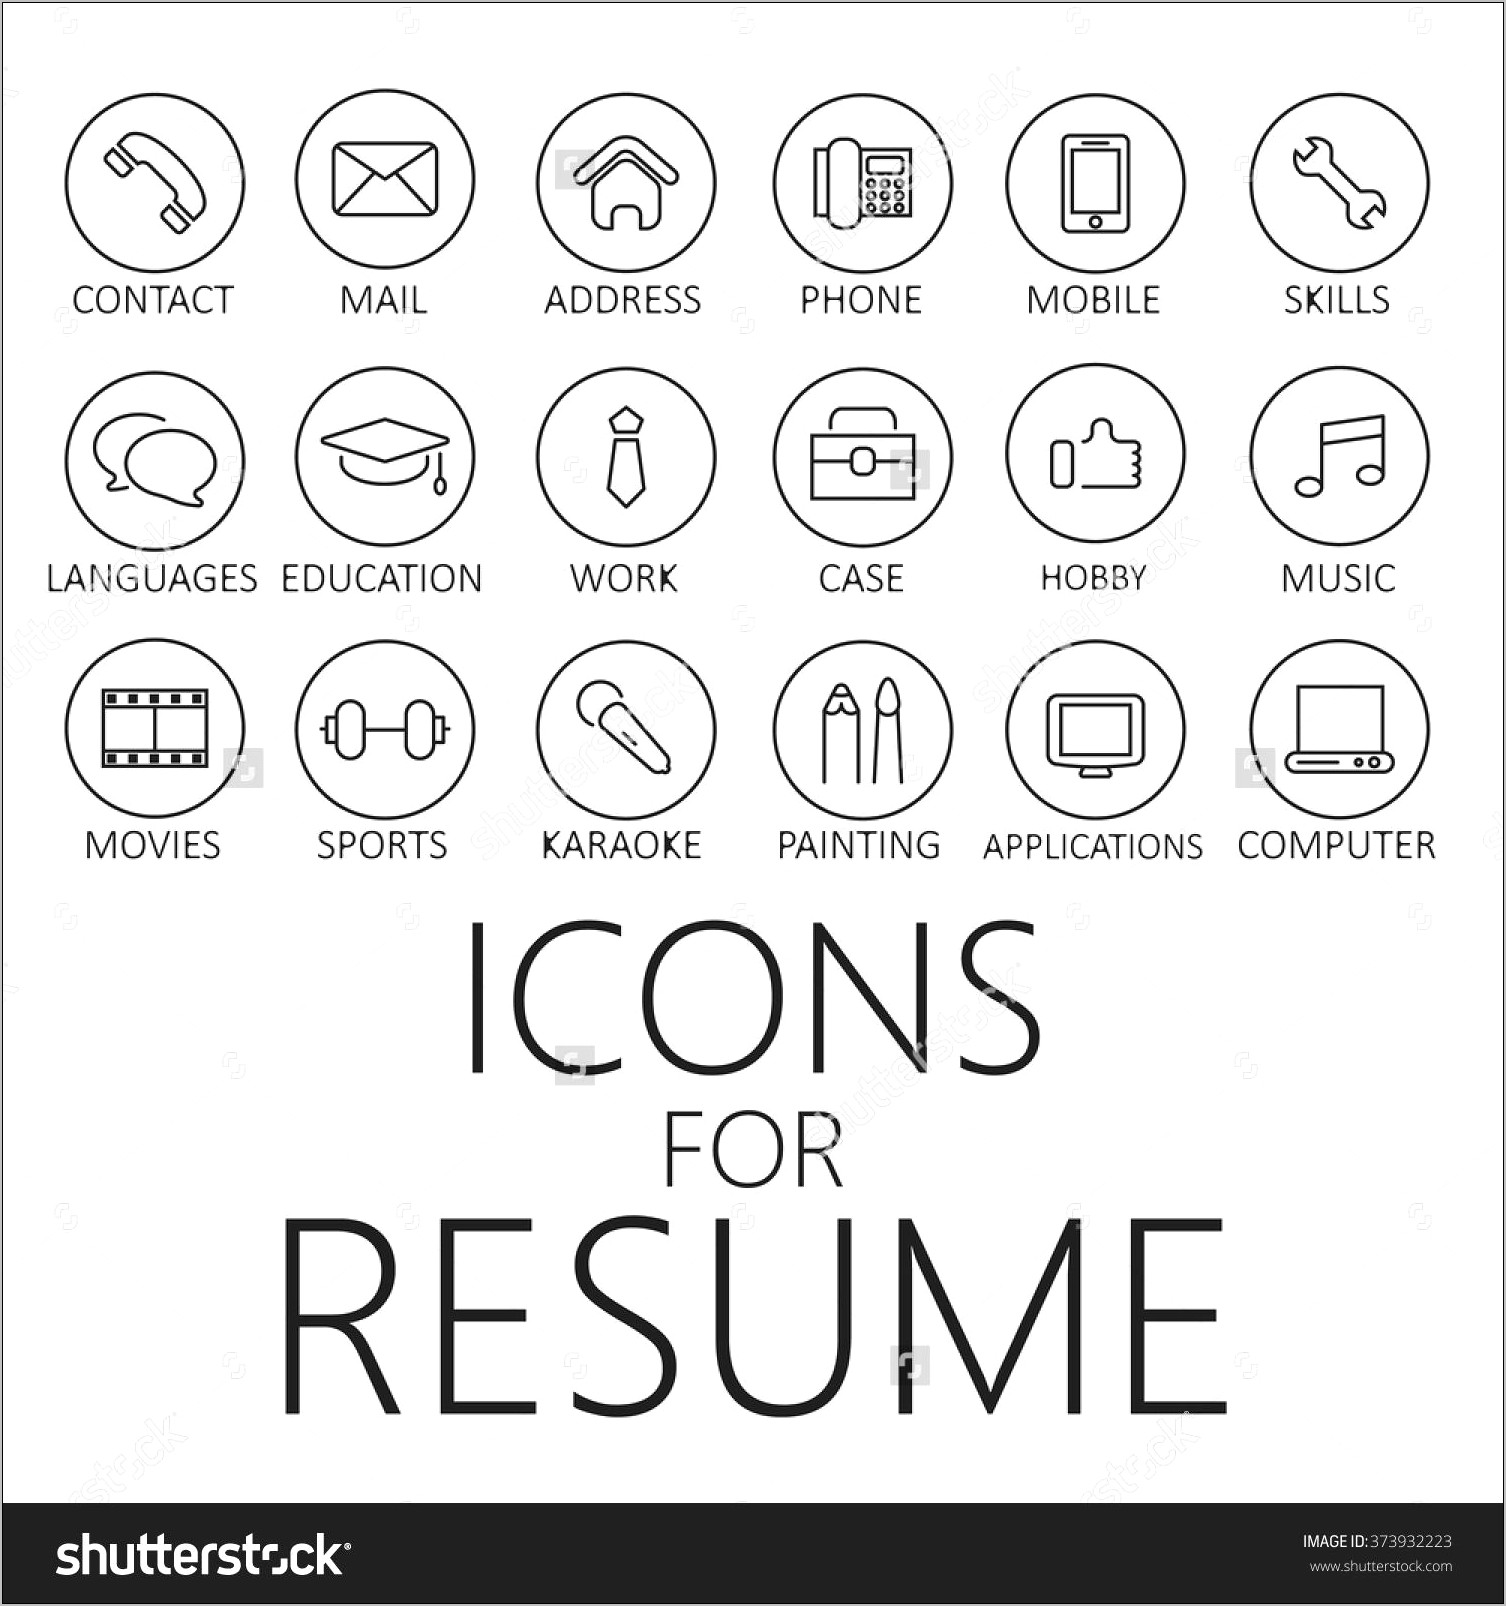 Career Objective Icon For Resume